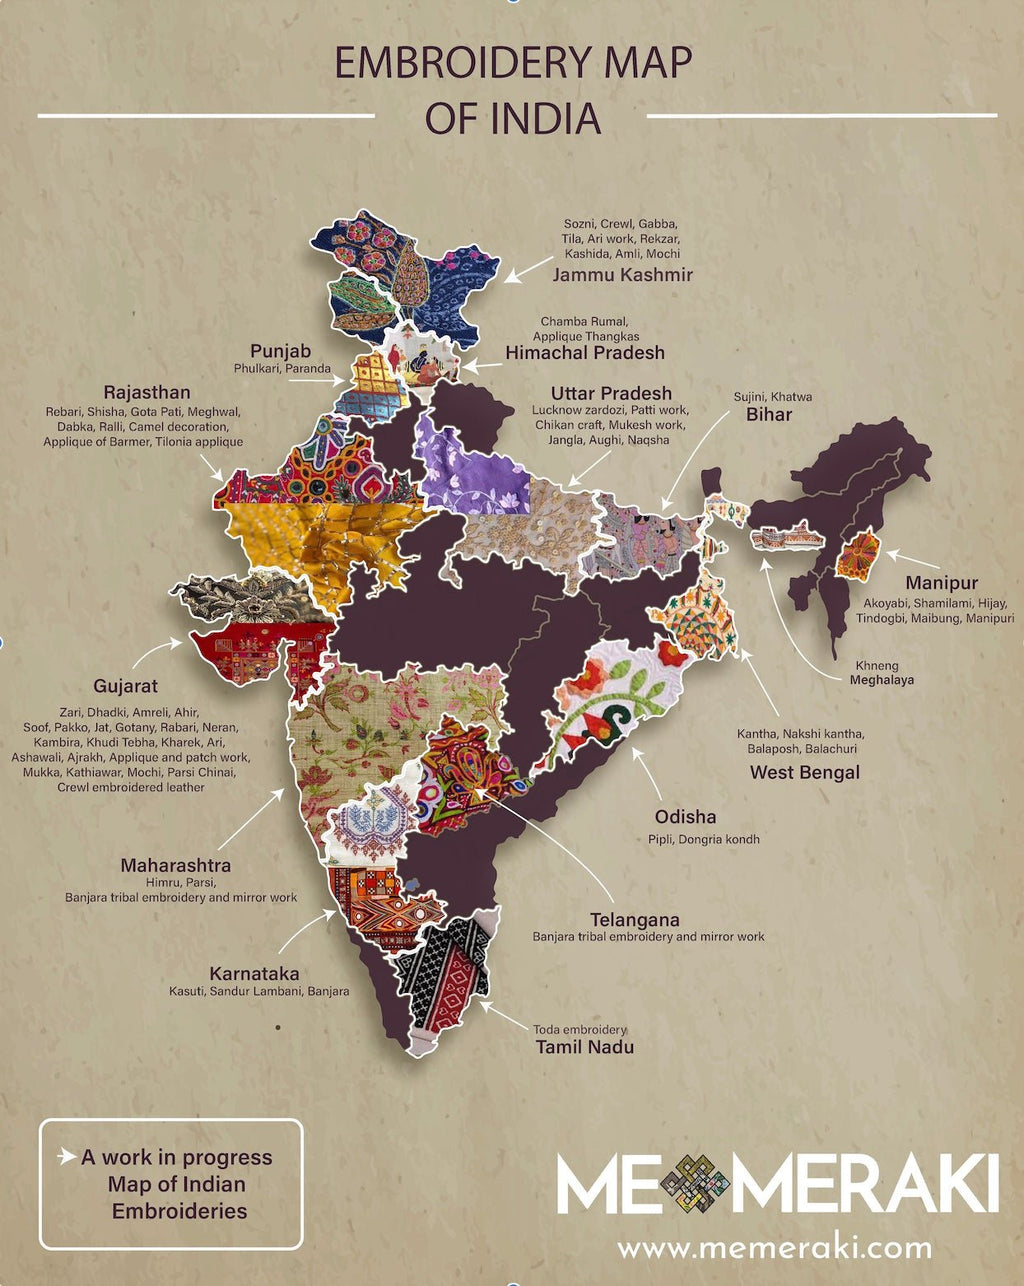 The Embroidery Map of India – Memeraki Retail and Tech Pvt Ltd.